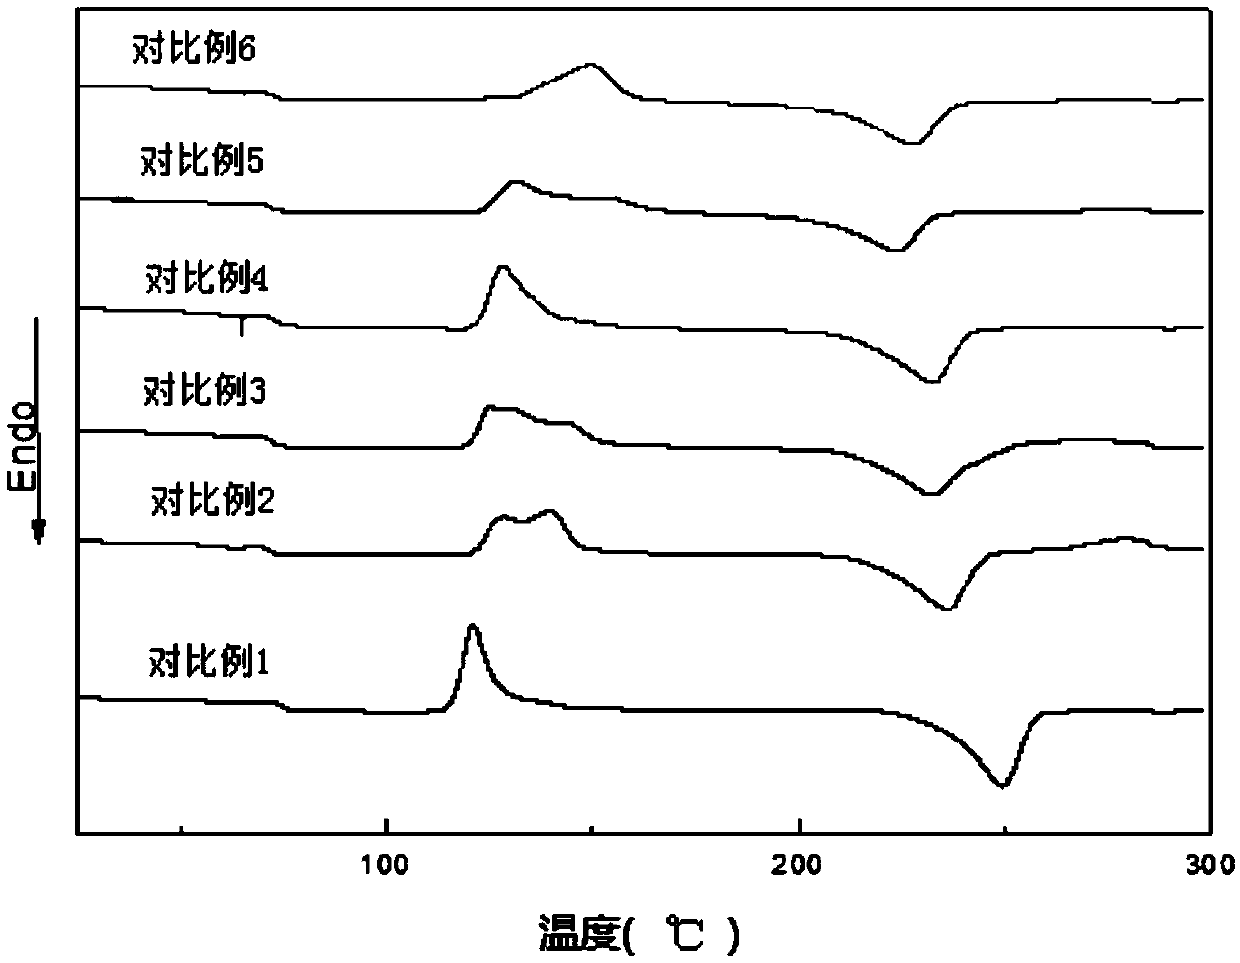 Uses of fluorine-containing sulfonate salt as flame retardant in polyester PET, and flame retardant composition comprising same